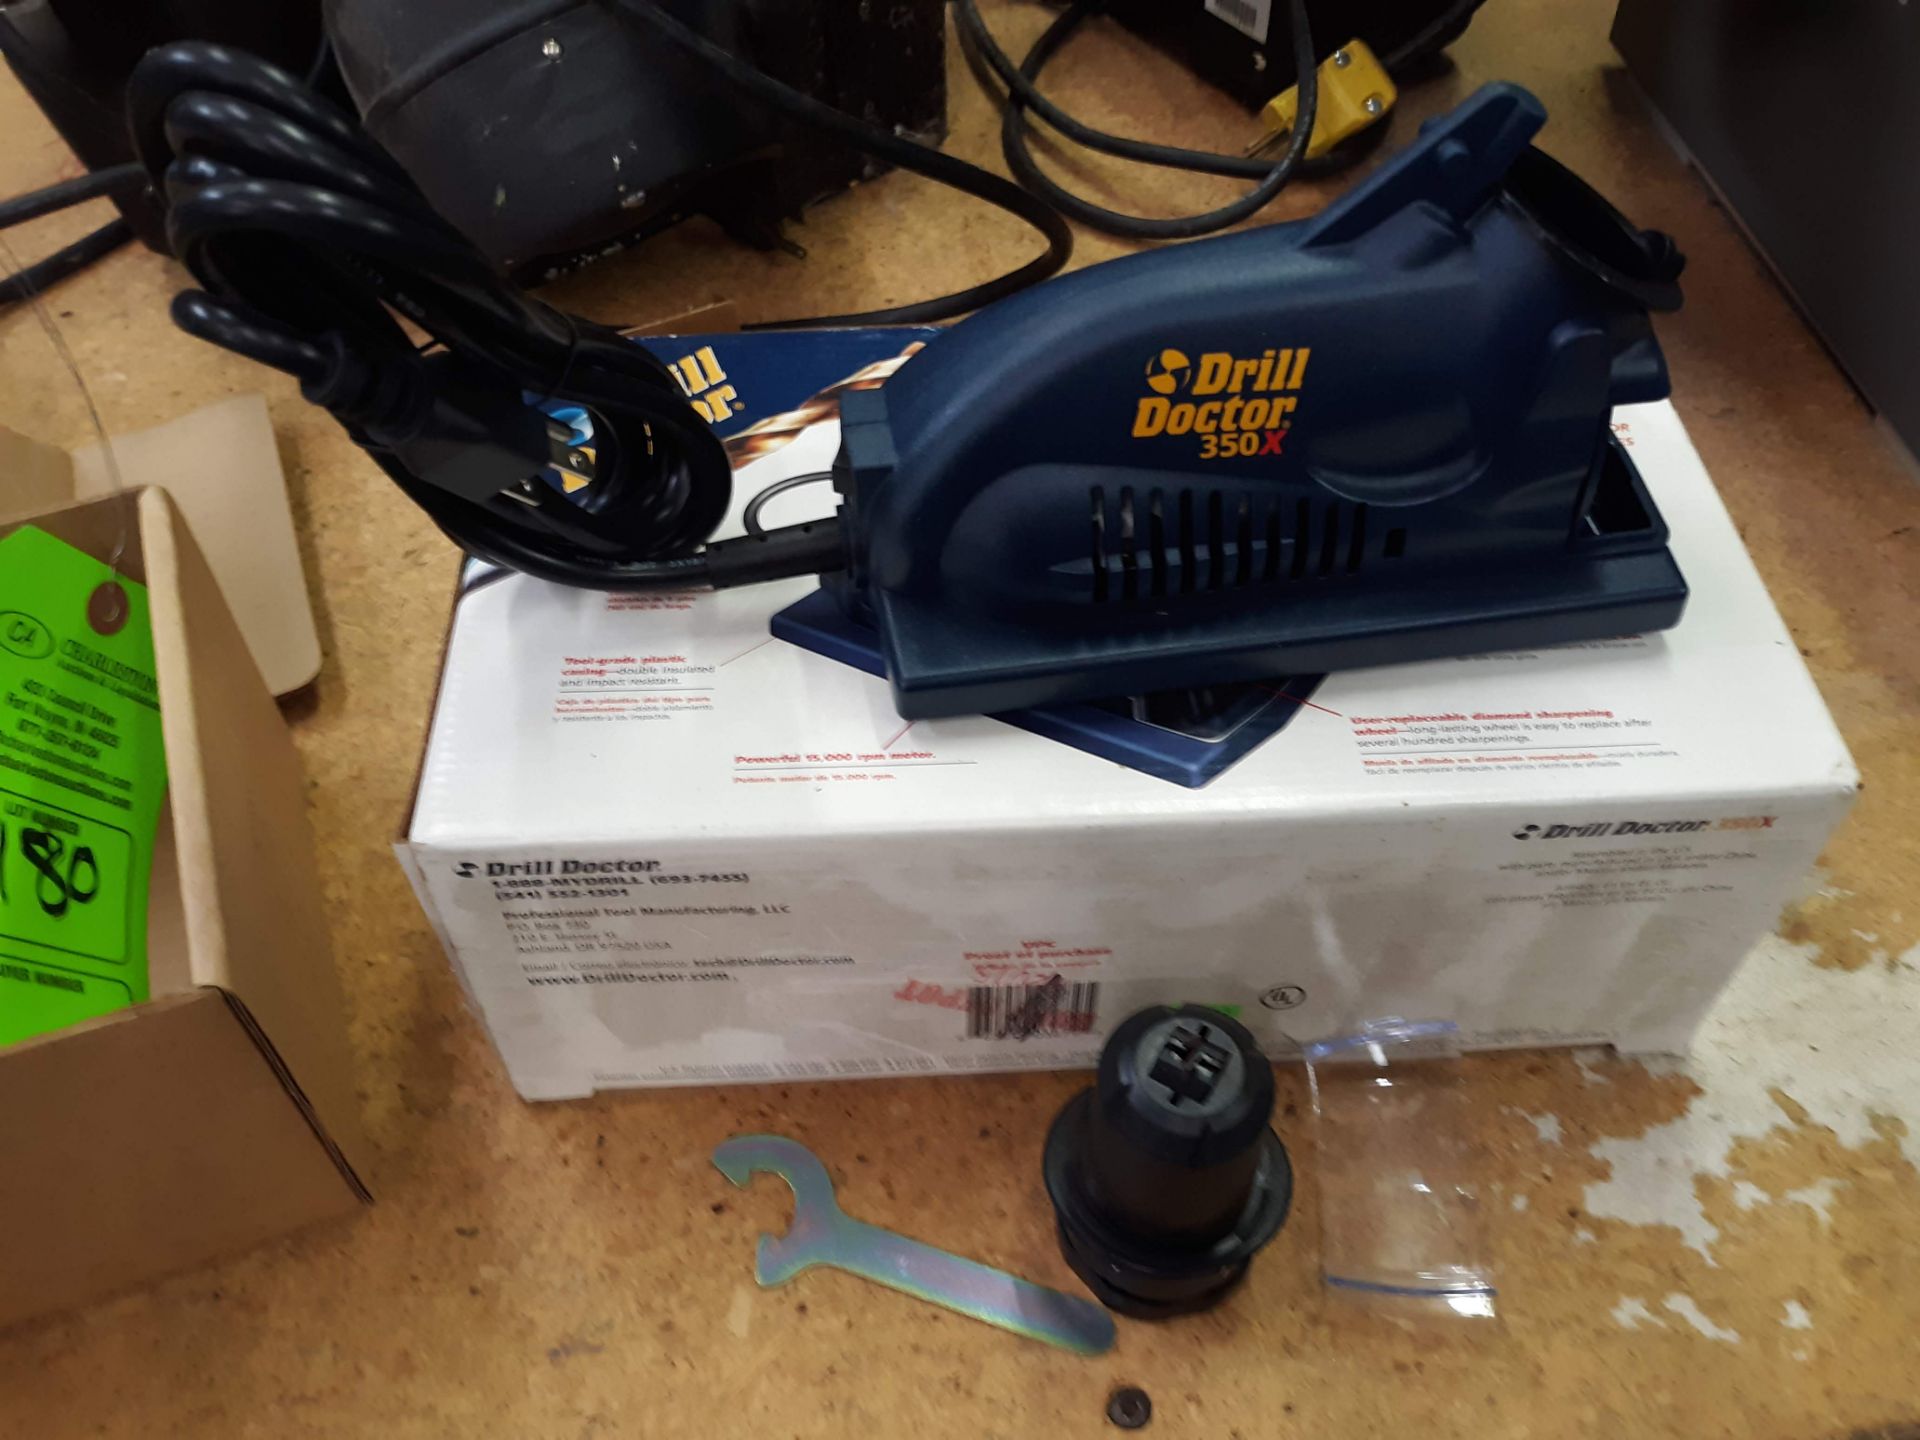 DRILL DOCTOR 350 X DRILL BIT SHARPENER IN BOX (LOCATED AT: 432 COUNCIL DRIVE, FORT WAYNE, IN 46825) - Image 2 of 2